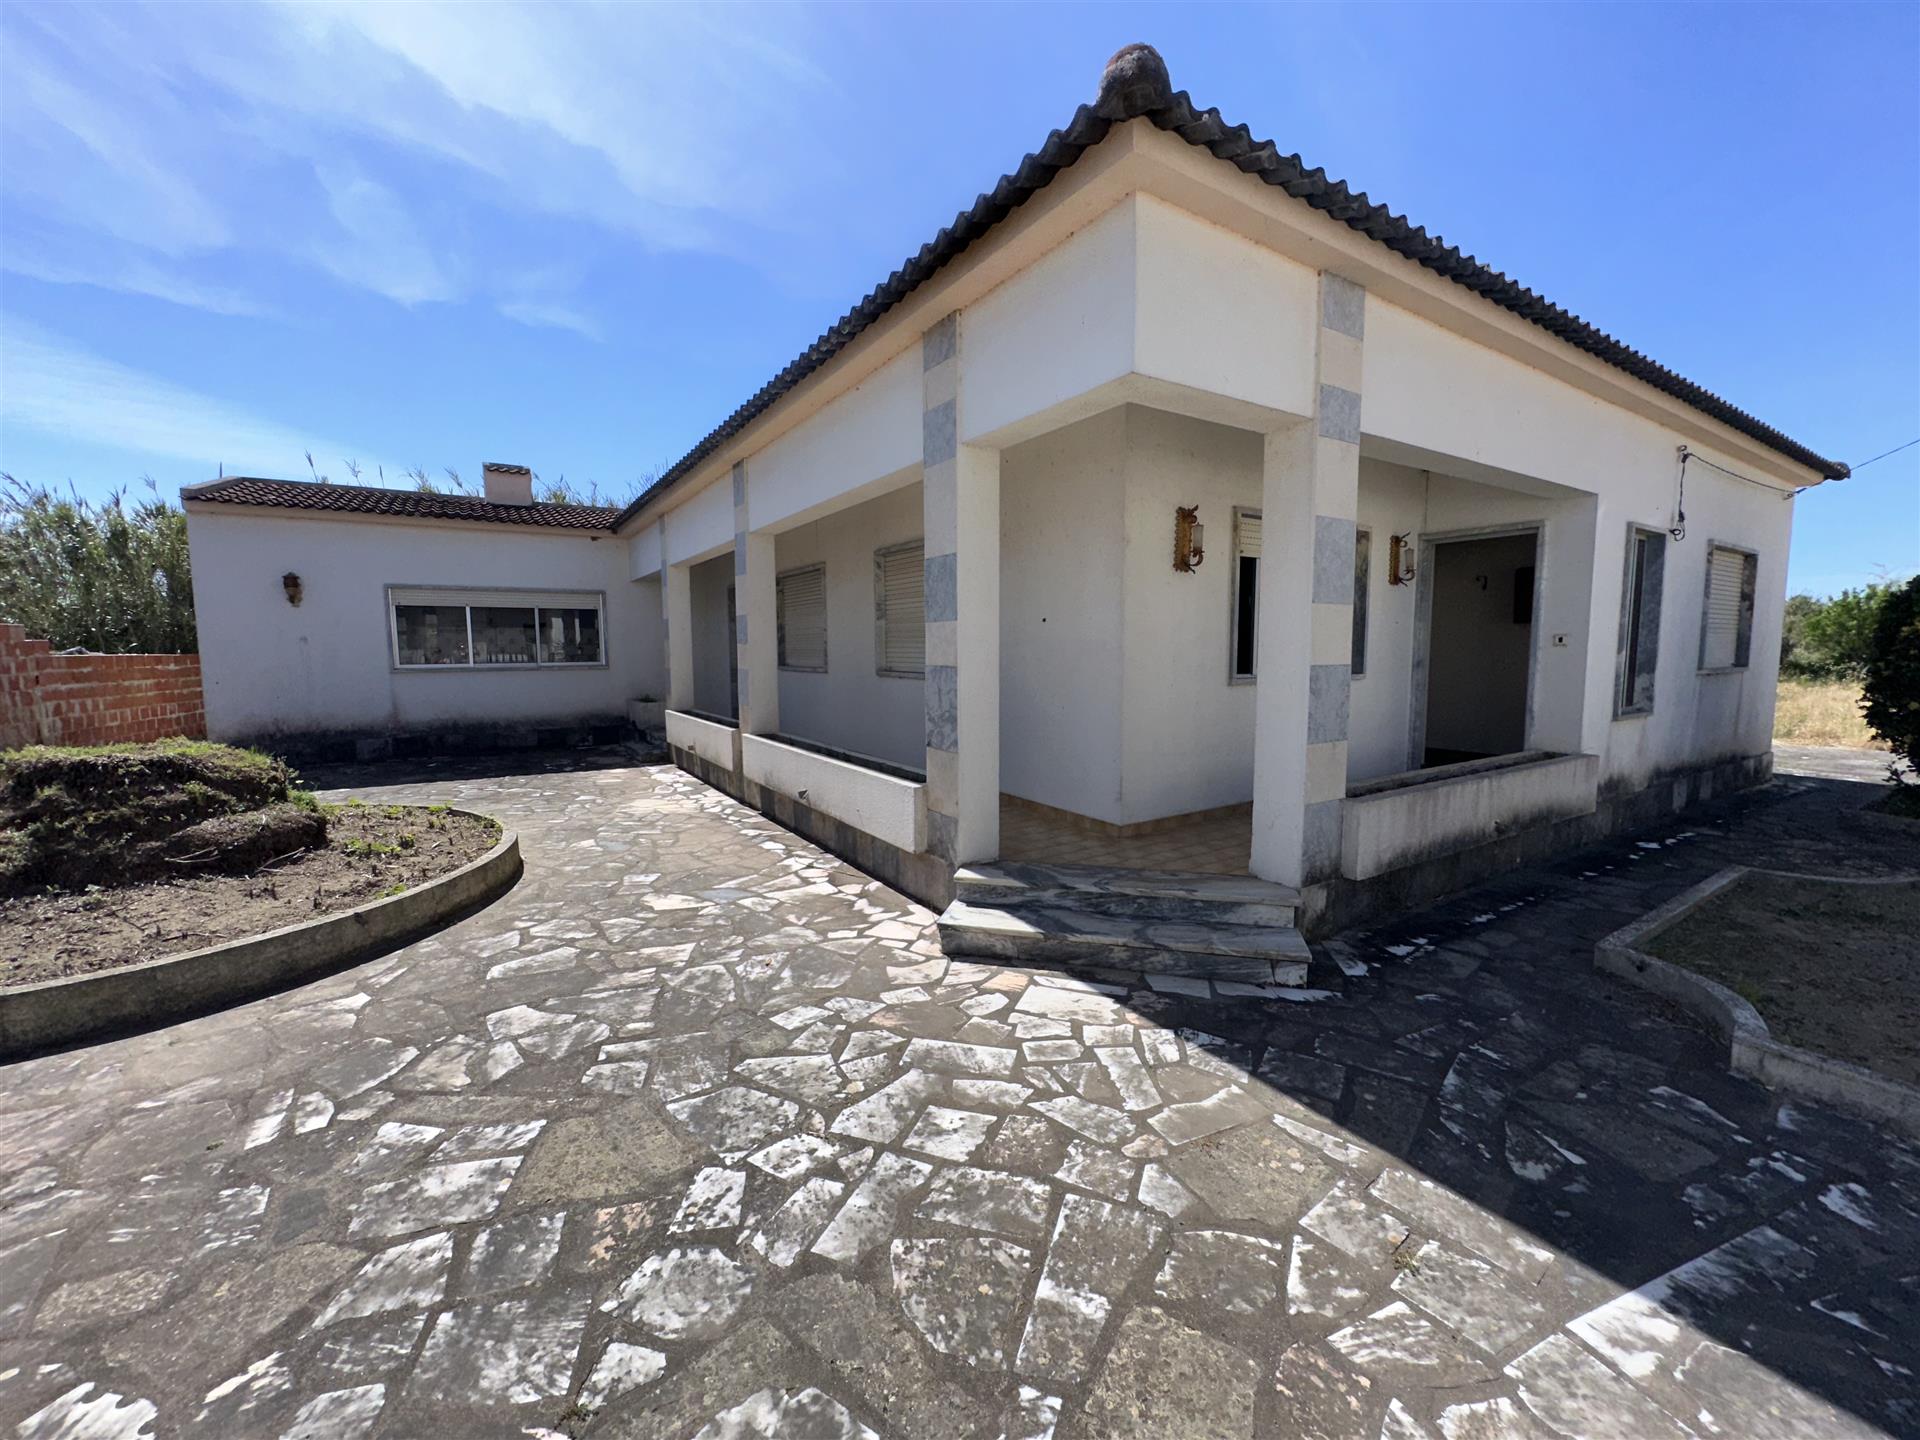 House with land, Lourinhã (center), one floor, a few minutes from the beach